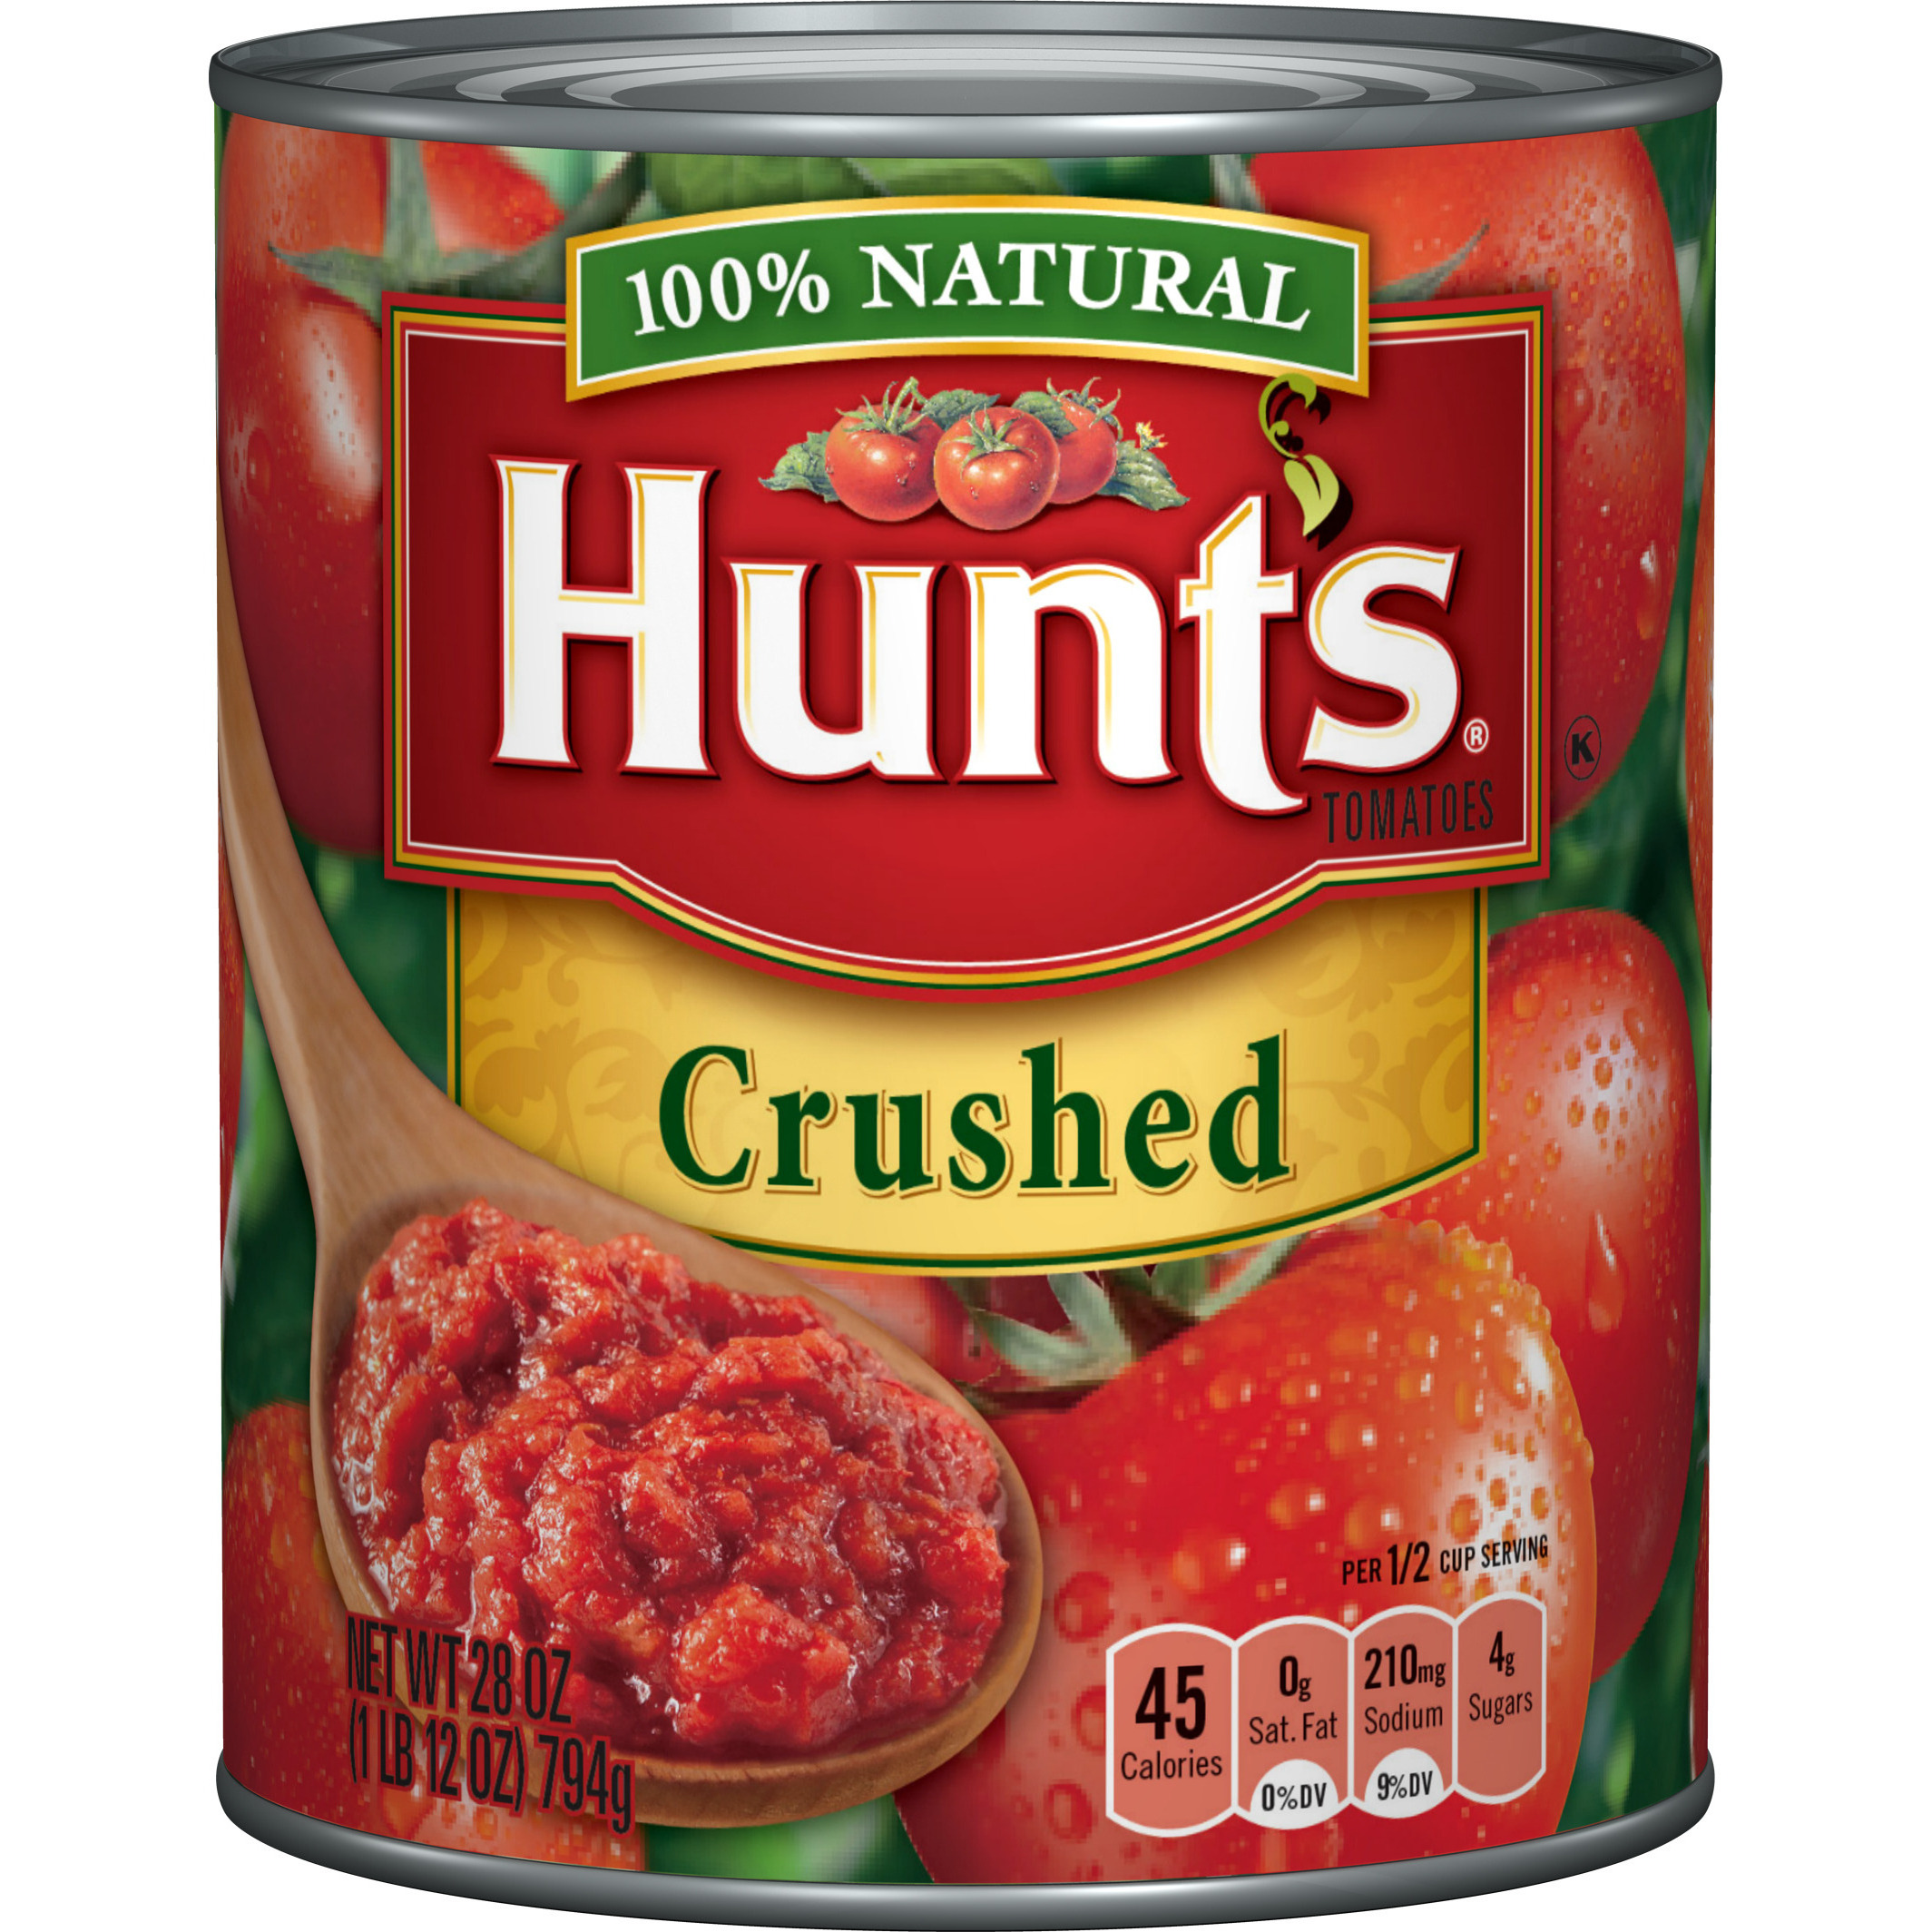 Case of 4 - Hunt's Crushed Tomatoes - 800 Gm (1.76 Lb) [50% Off]